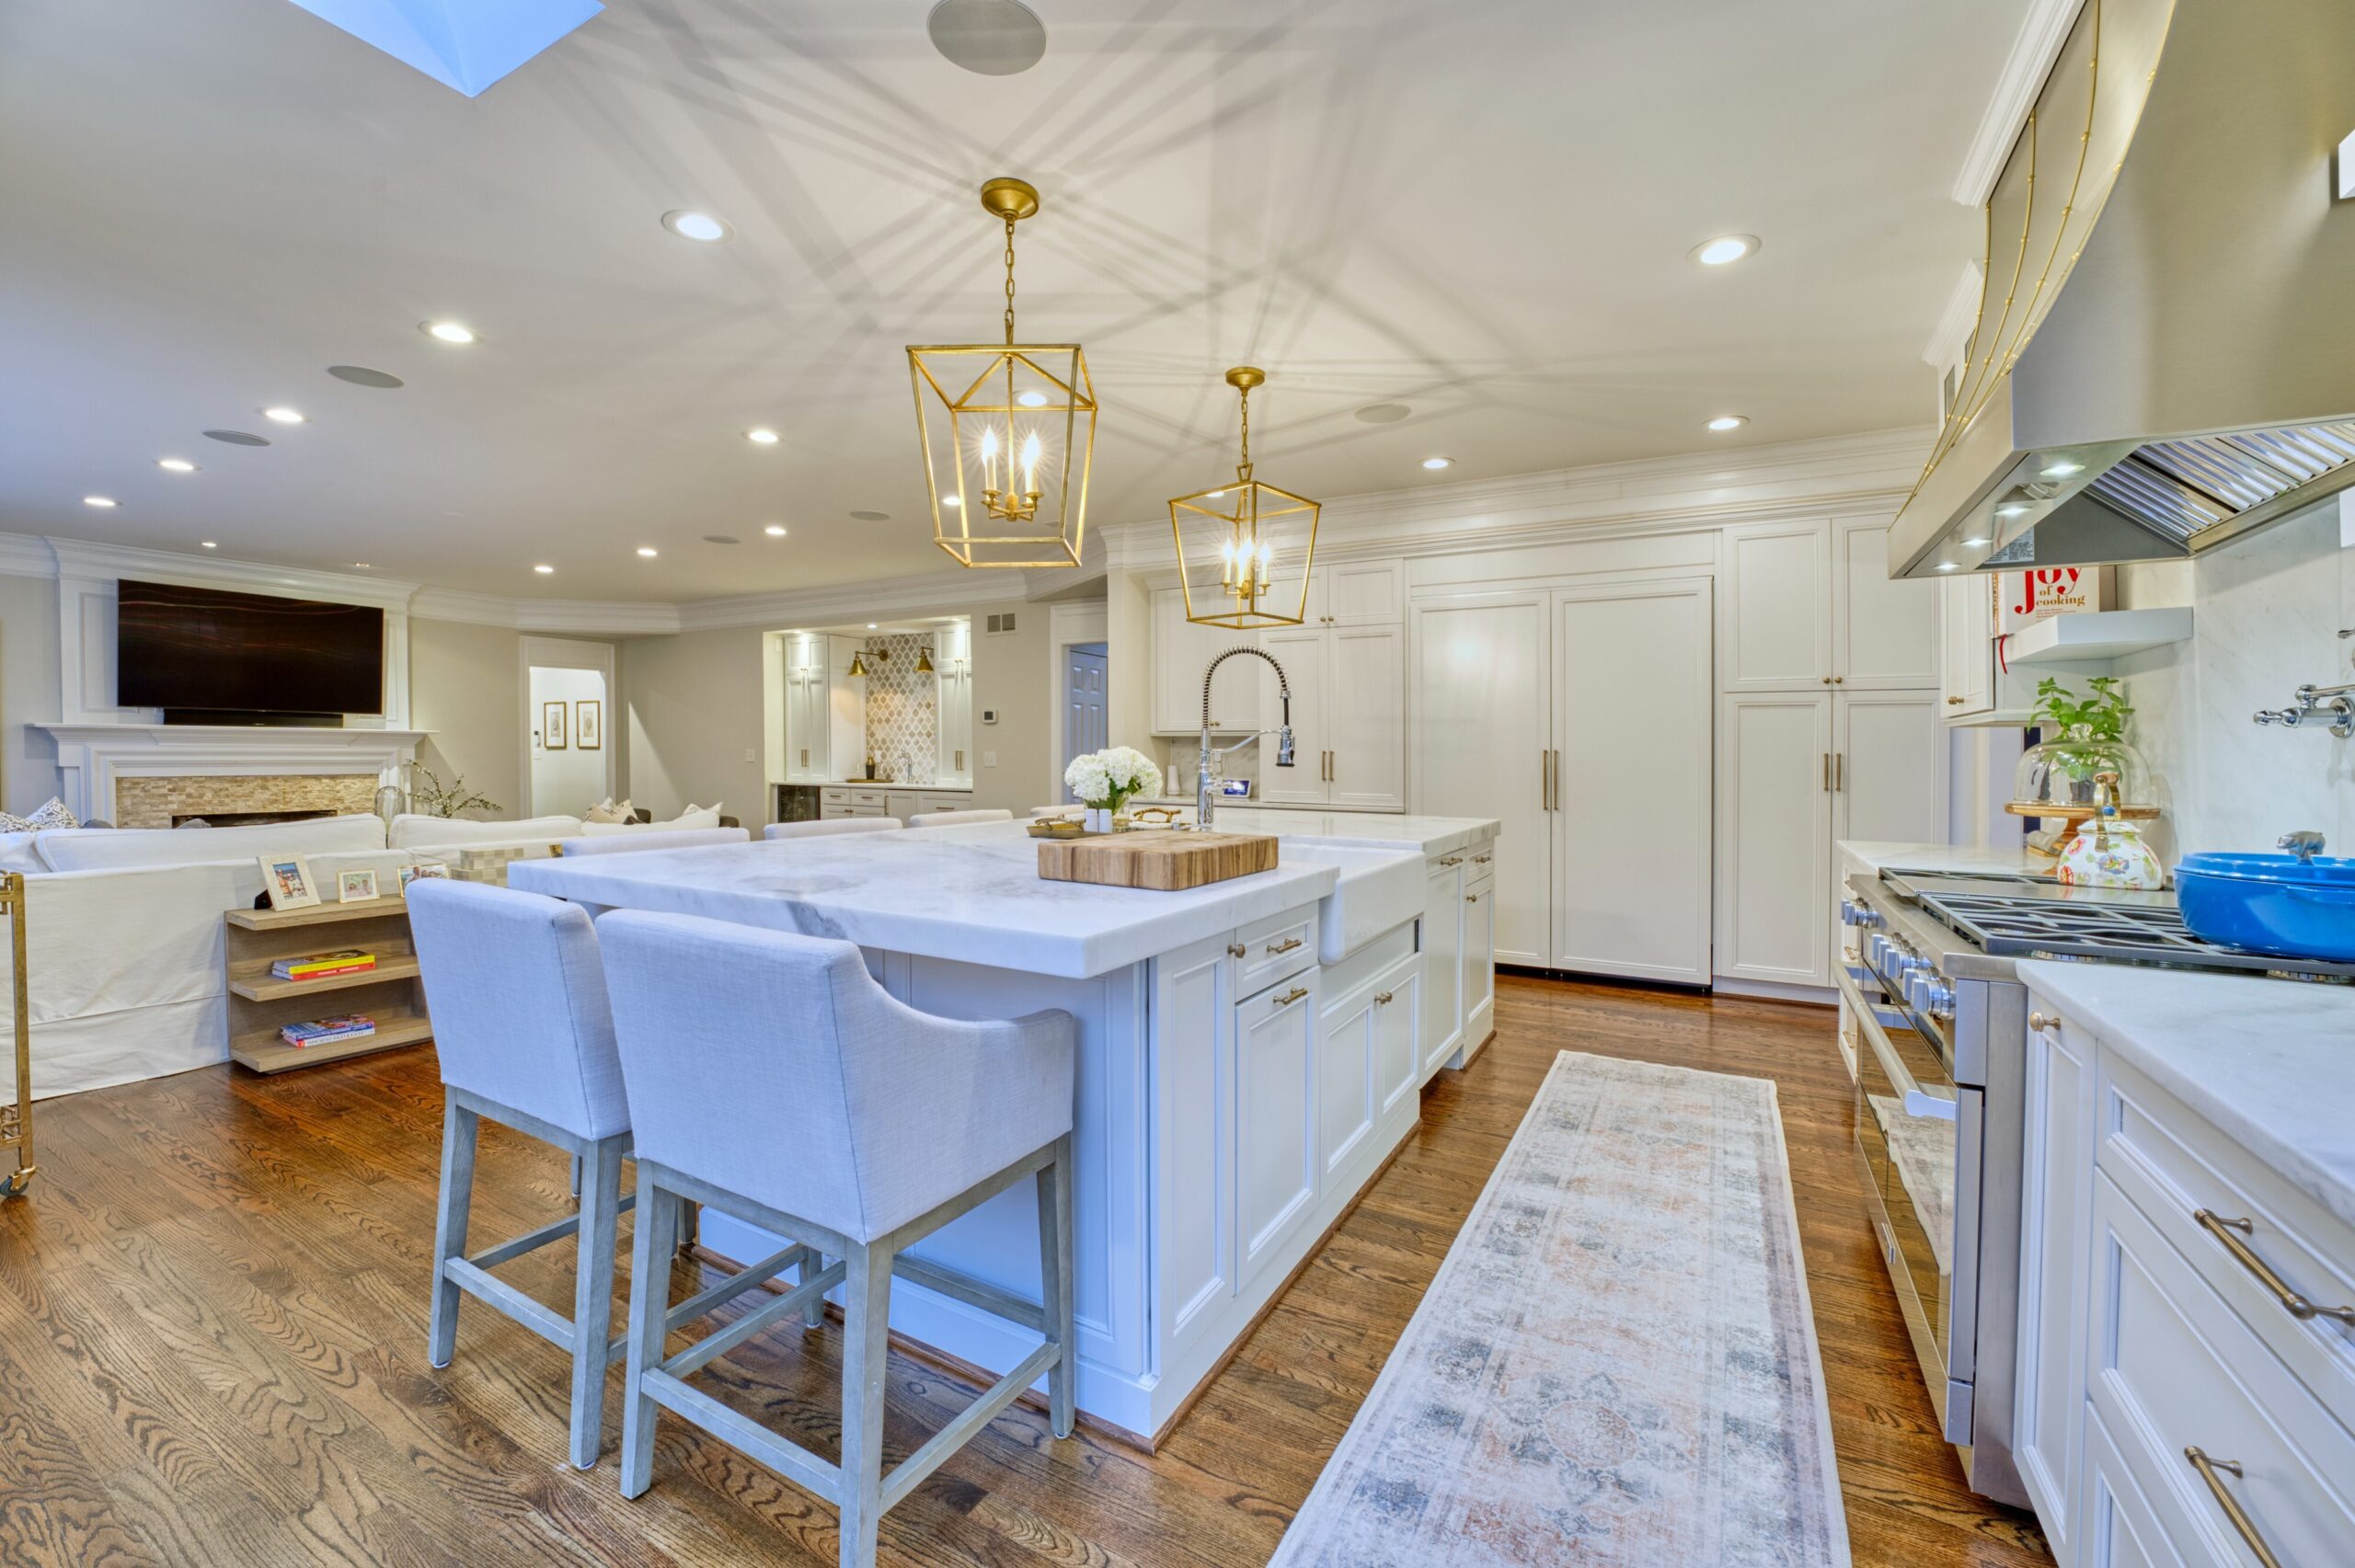 Professional interior photo of 47572 Compton Circle, Sterling, VA - showing the large open kitchen and island flowing into the family room bordered by a wetbar